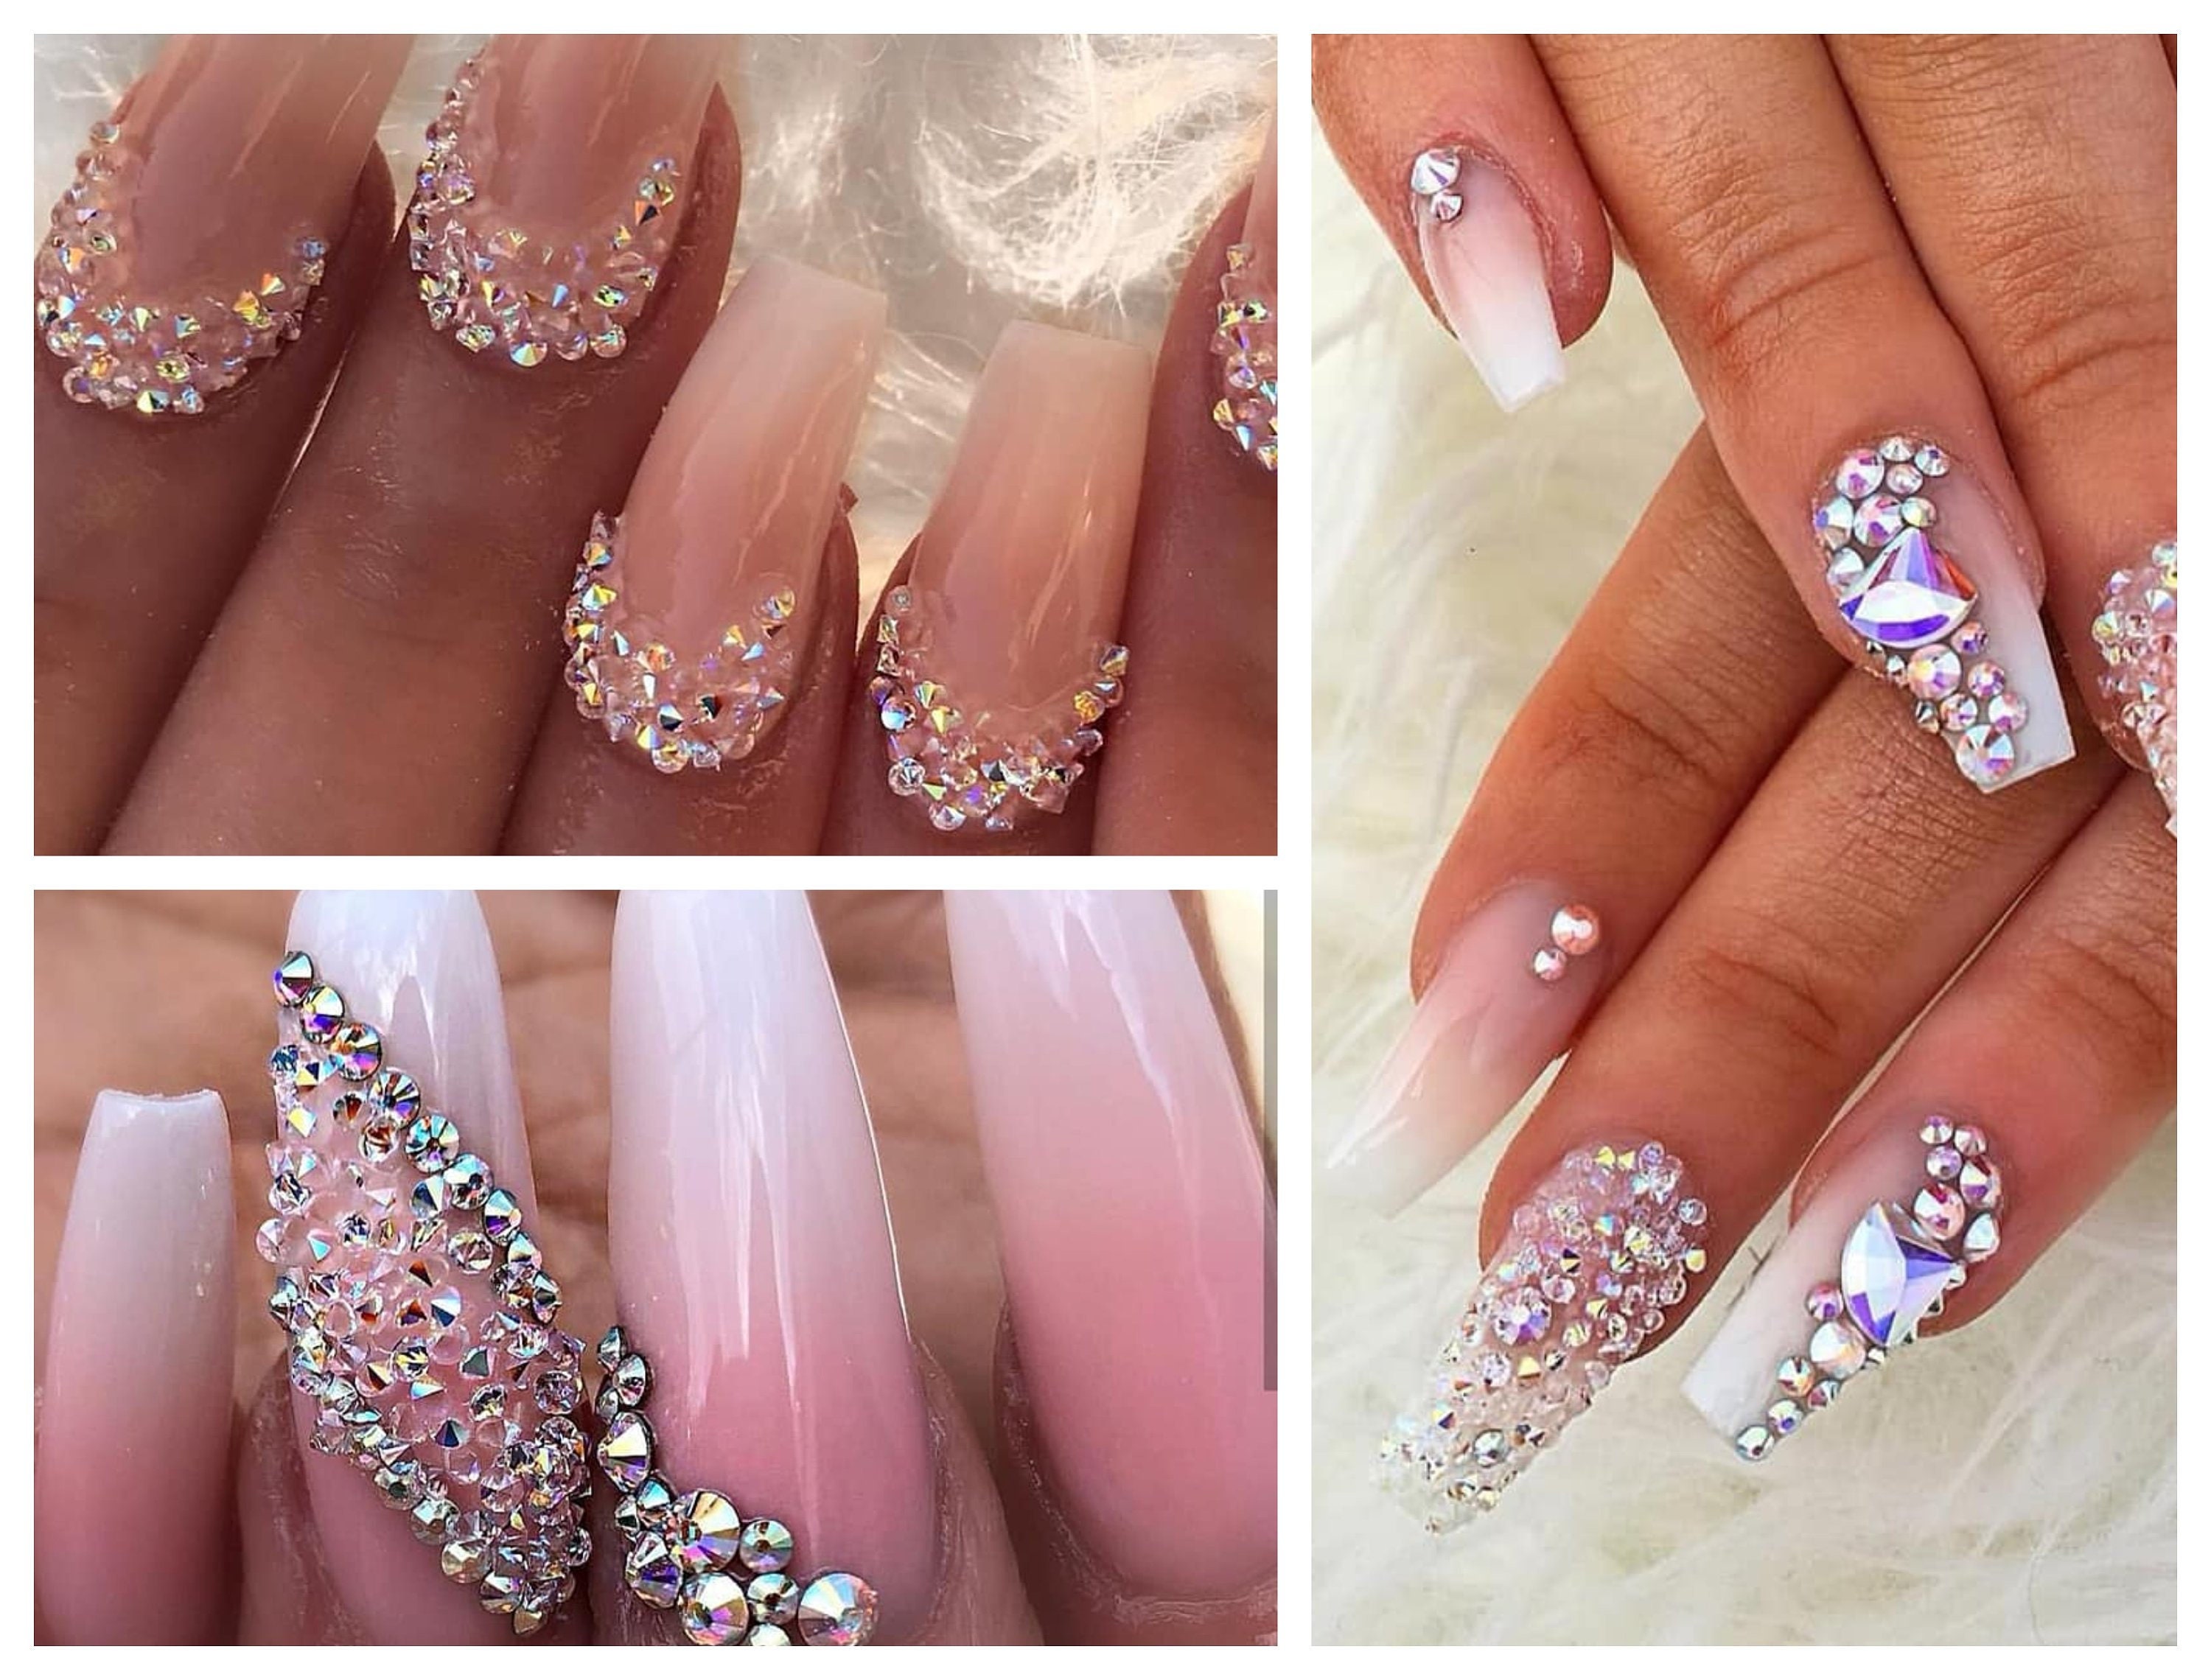 2. How to Create Stunning Crystal Nail Art Designs - wide 1